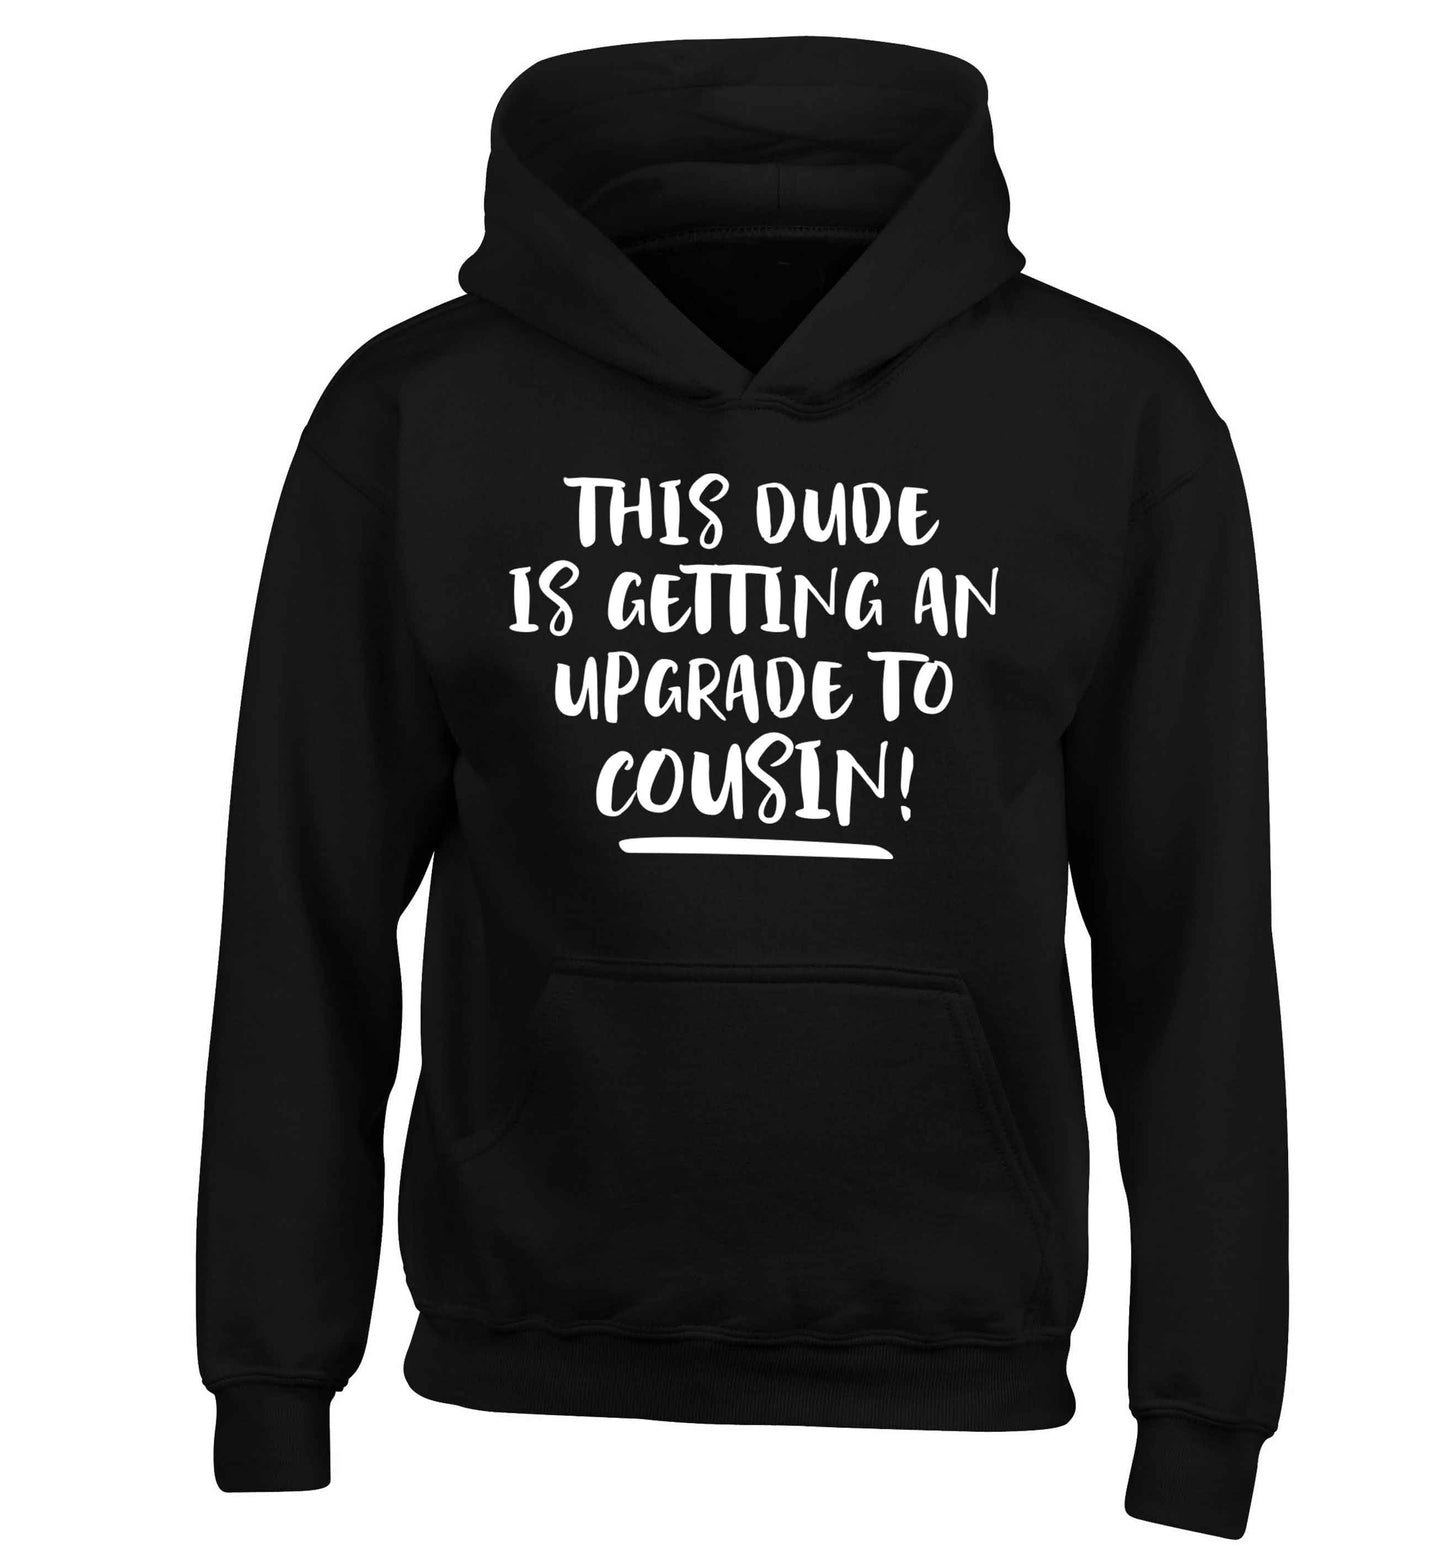 This dude is getting an upgrade to cousin! children's black hoodie 12-13 Years